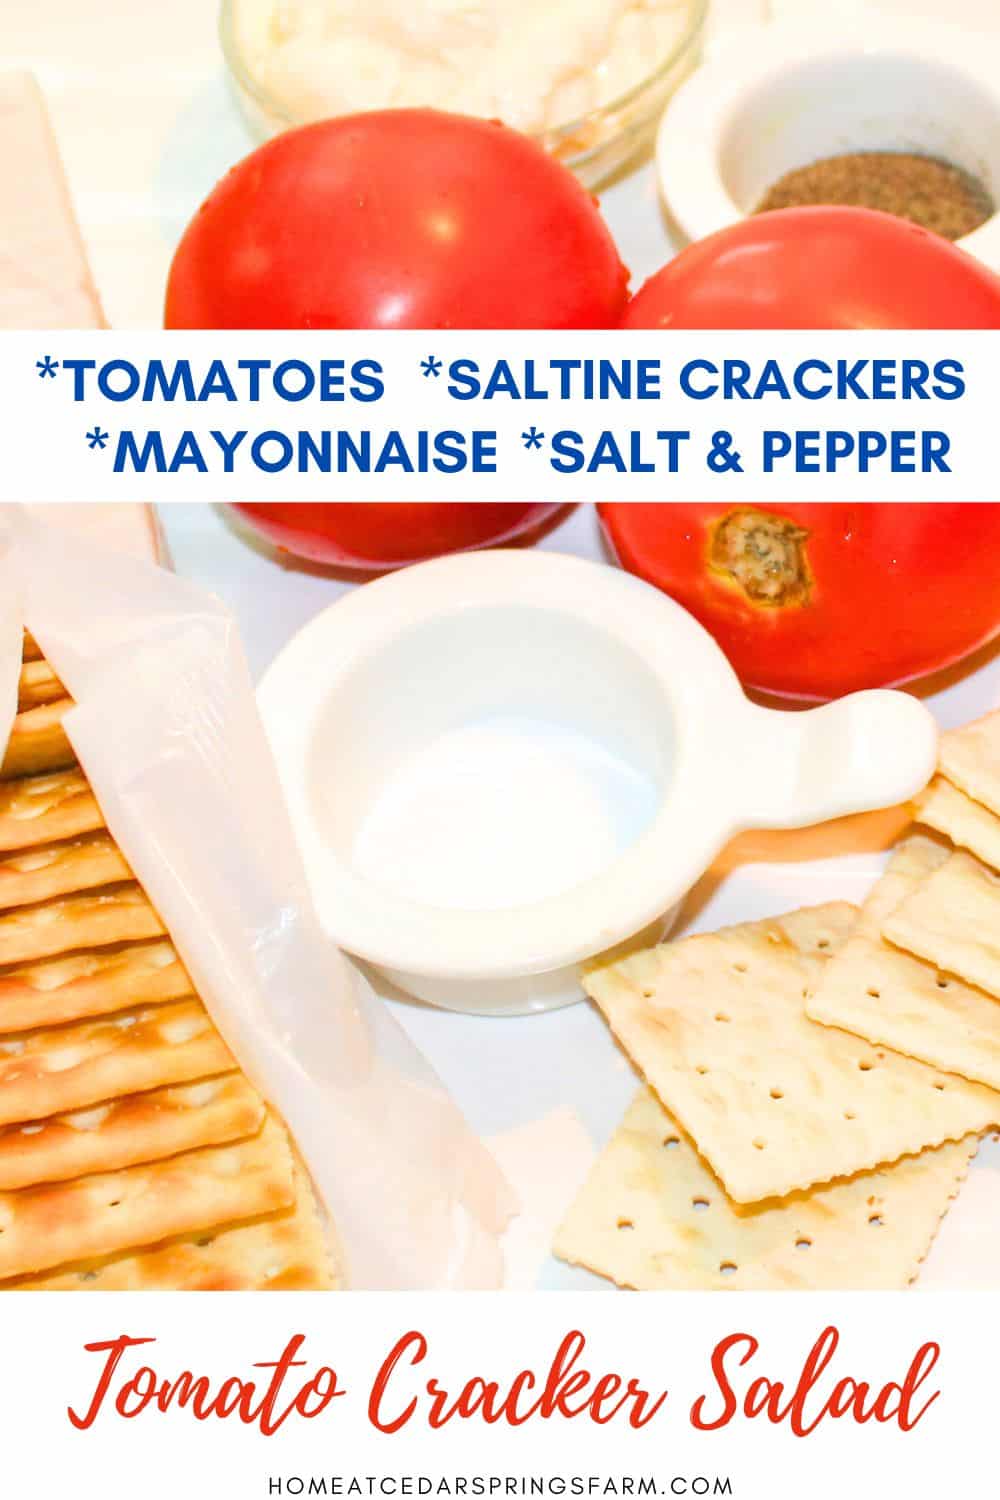 Ingredients needed for tomato cracker salad with text overlay.